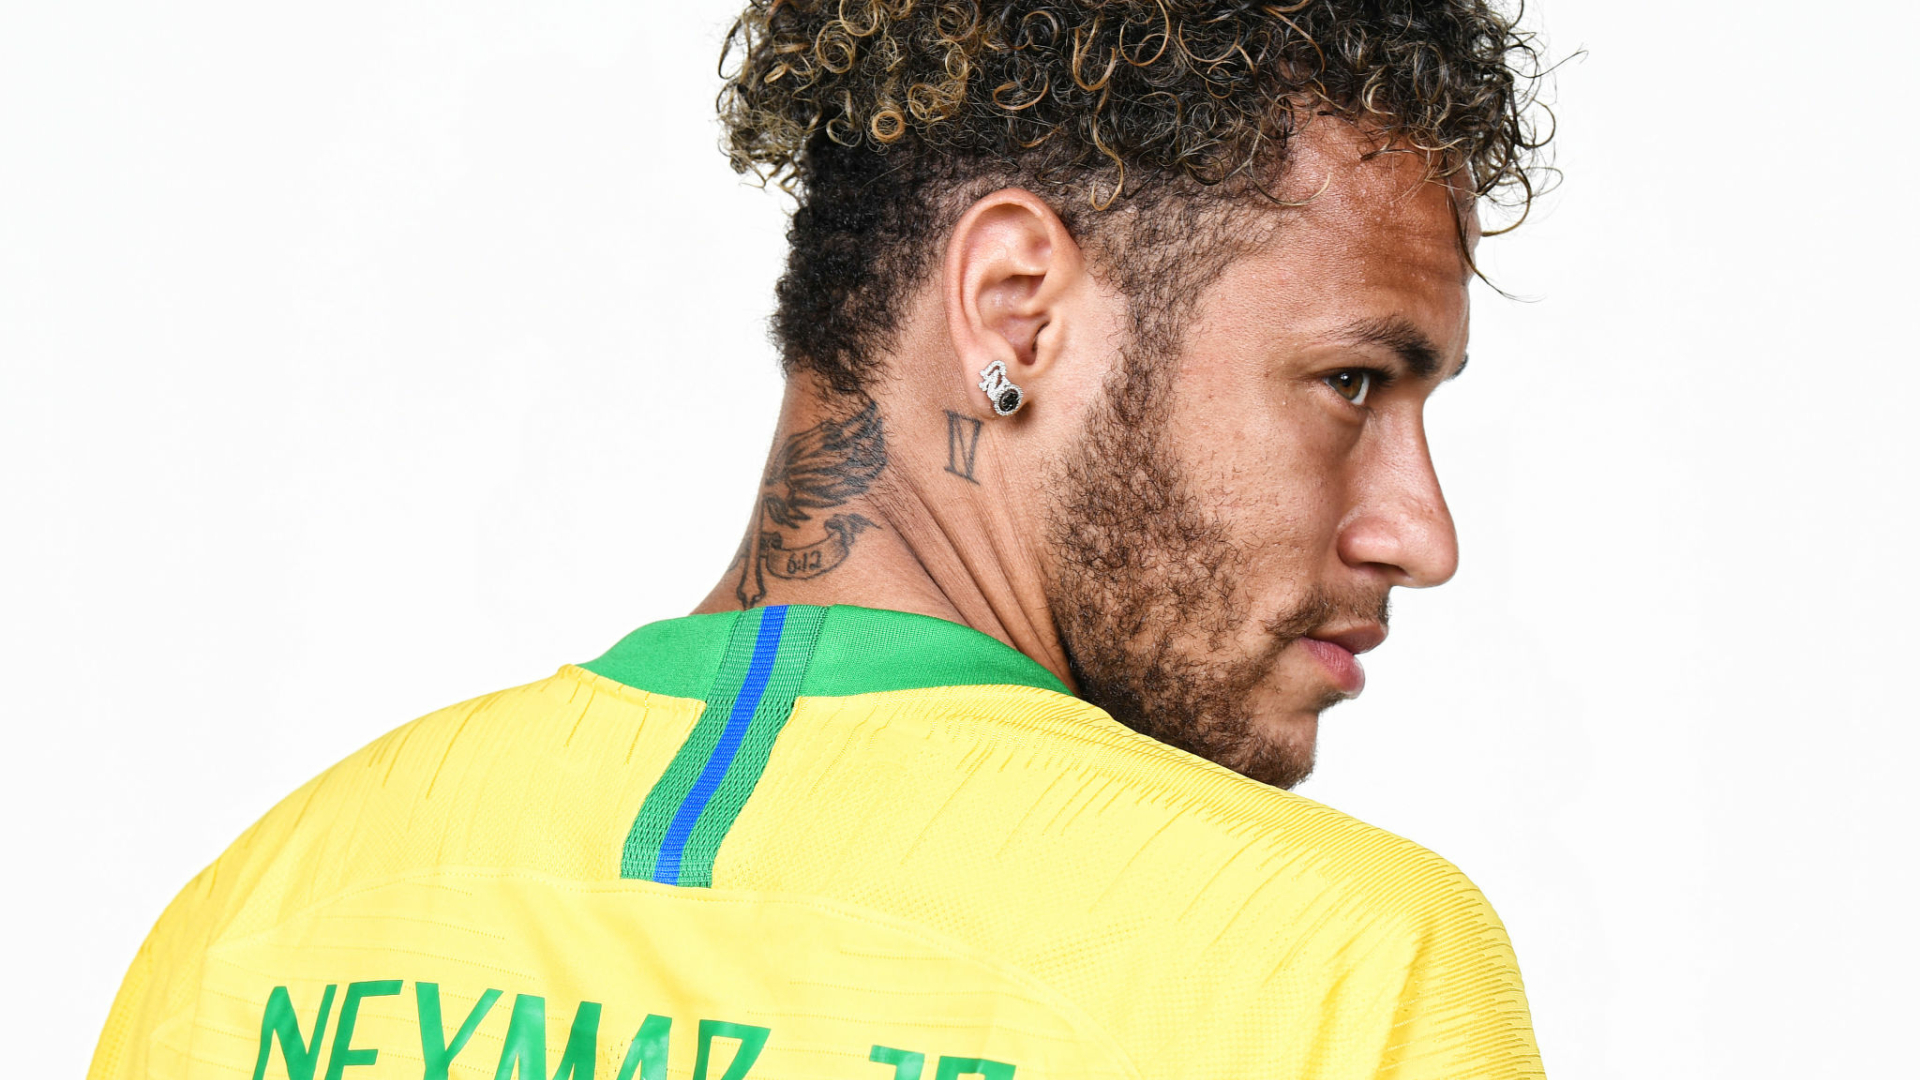 Brazil Football Player Dance FIFA 2022 World Cup Wallpaper, HD Sports 4K  Wallpapers, Images and Background - Wallpapers Den